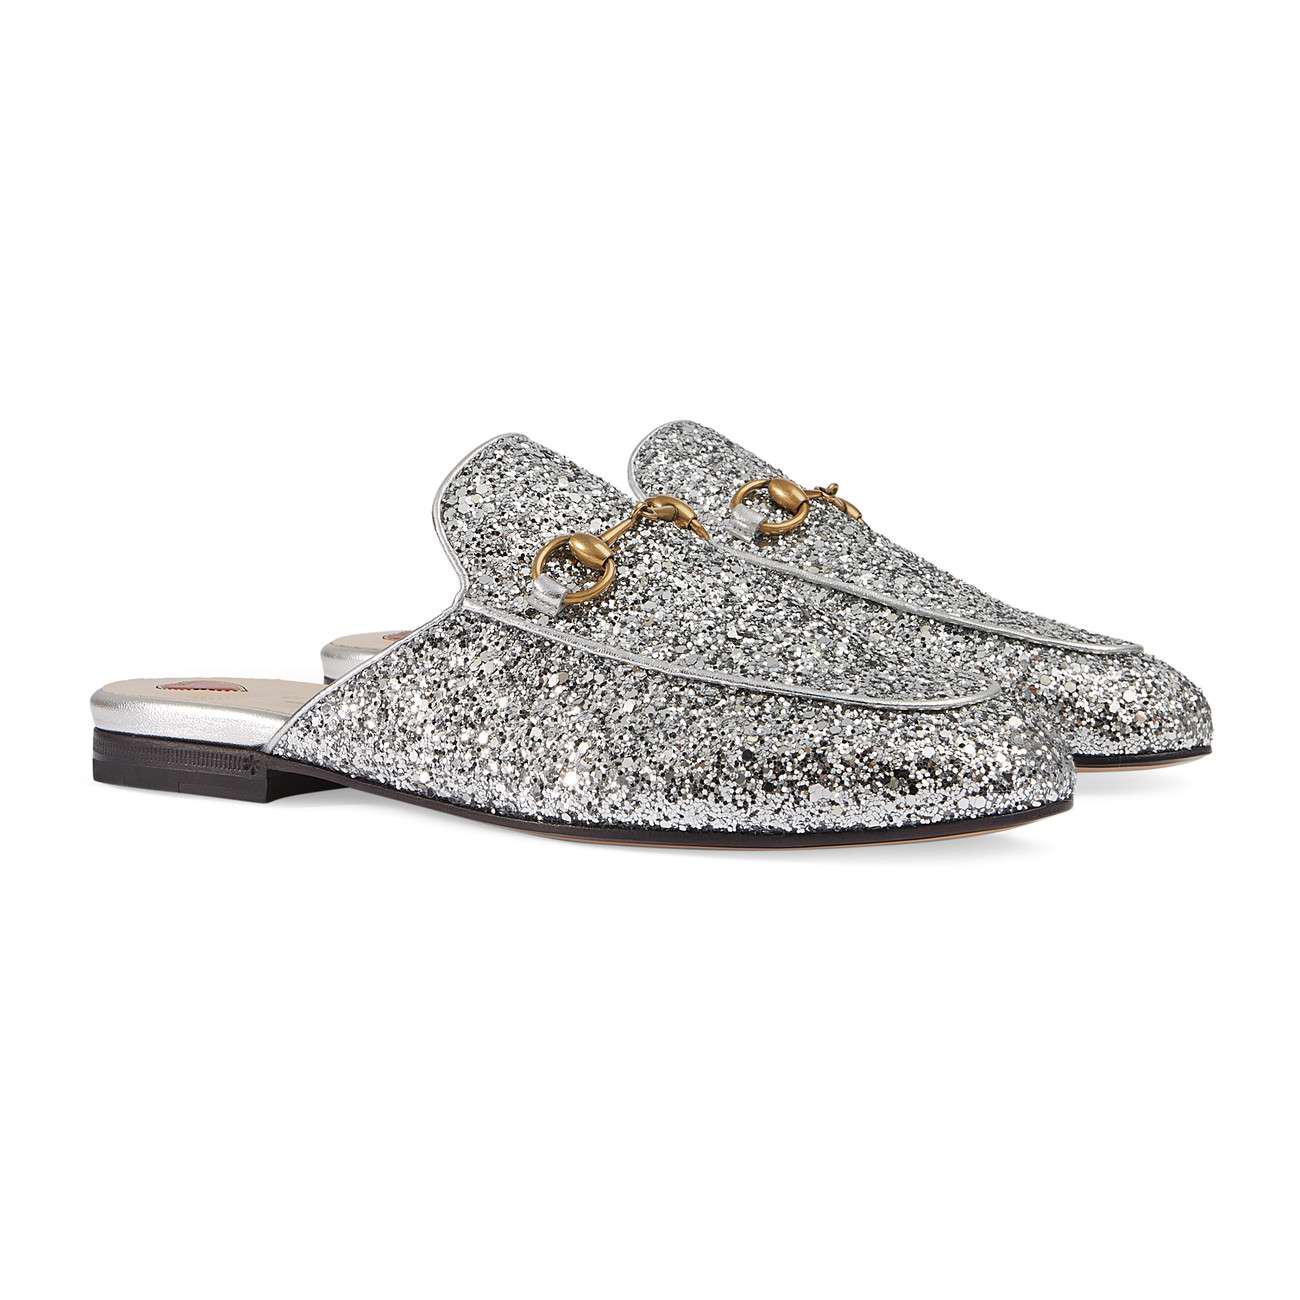 Gucci Princetown Glitter Backless Loafer in Metallic | Lyst